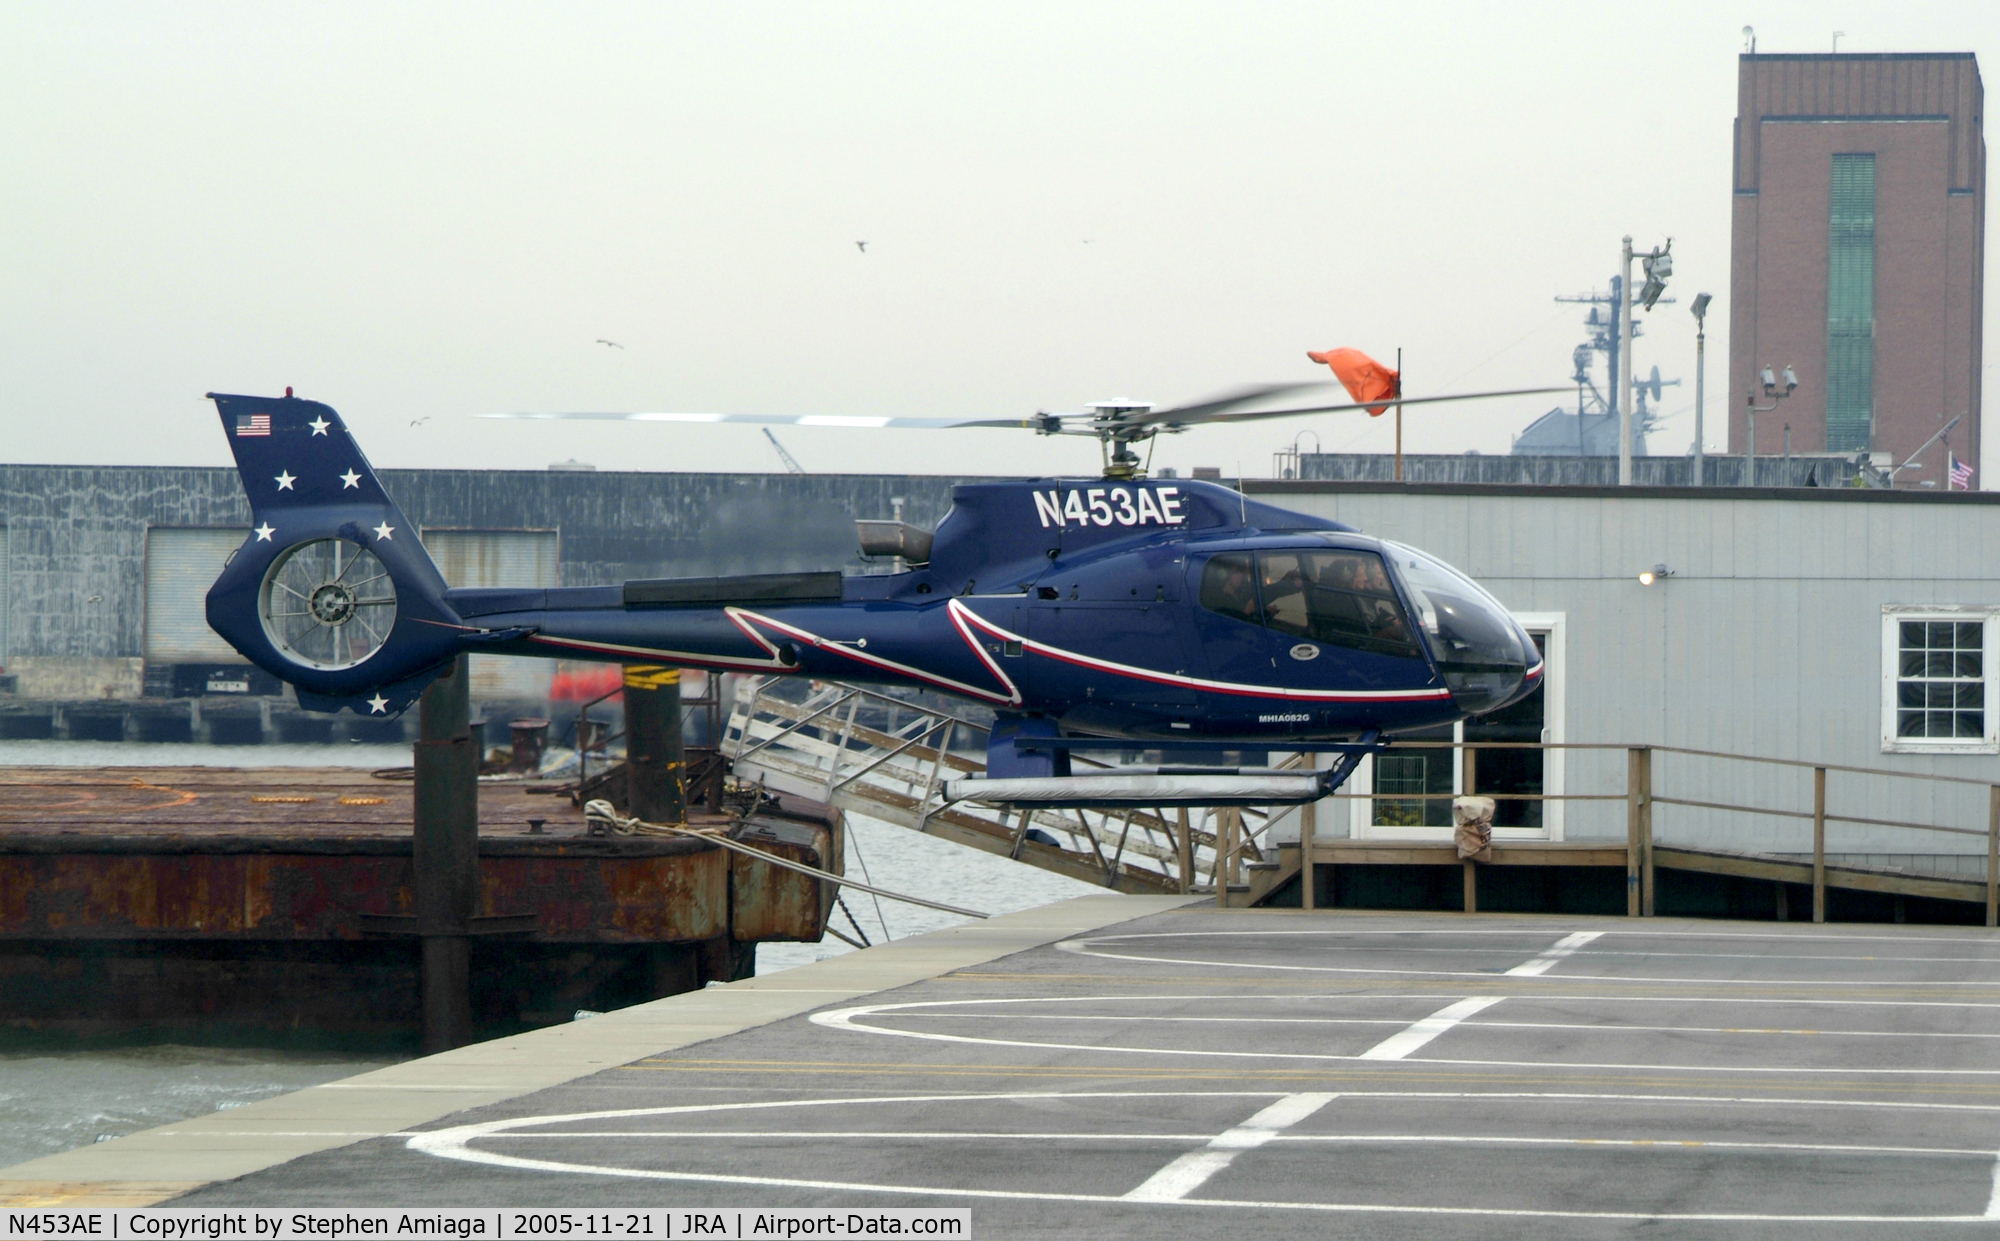 N453AE, 2001 Eurocopter EC-130B-4 (AS-350B-4) C/N 3487, Operated by Liberty Helicopters, 3AE lands at Spot 7.